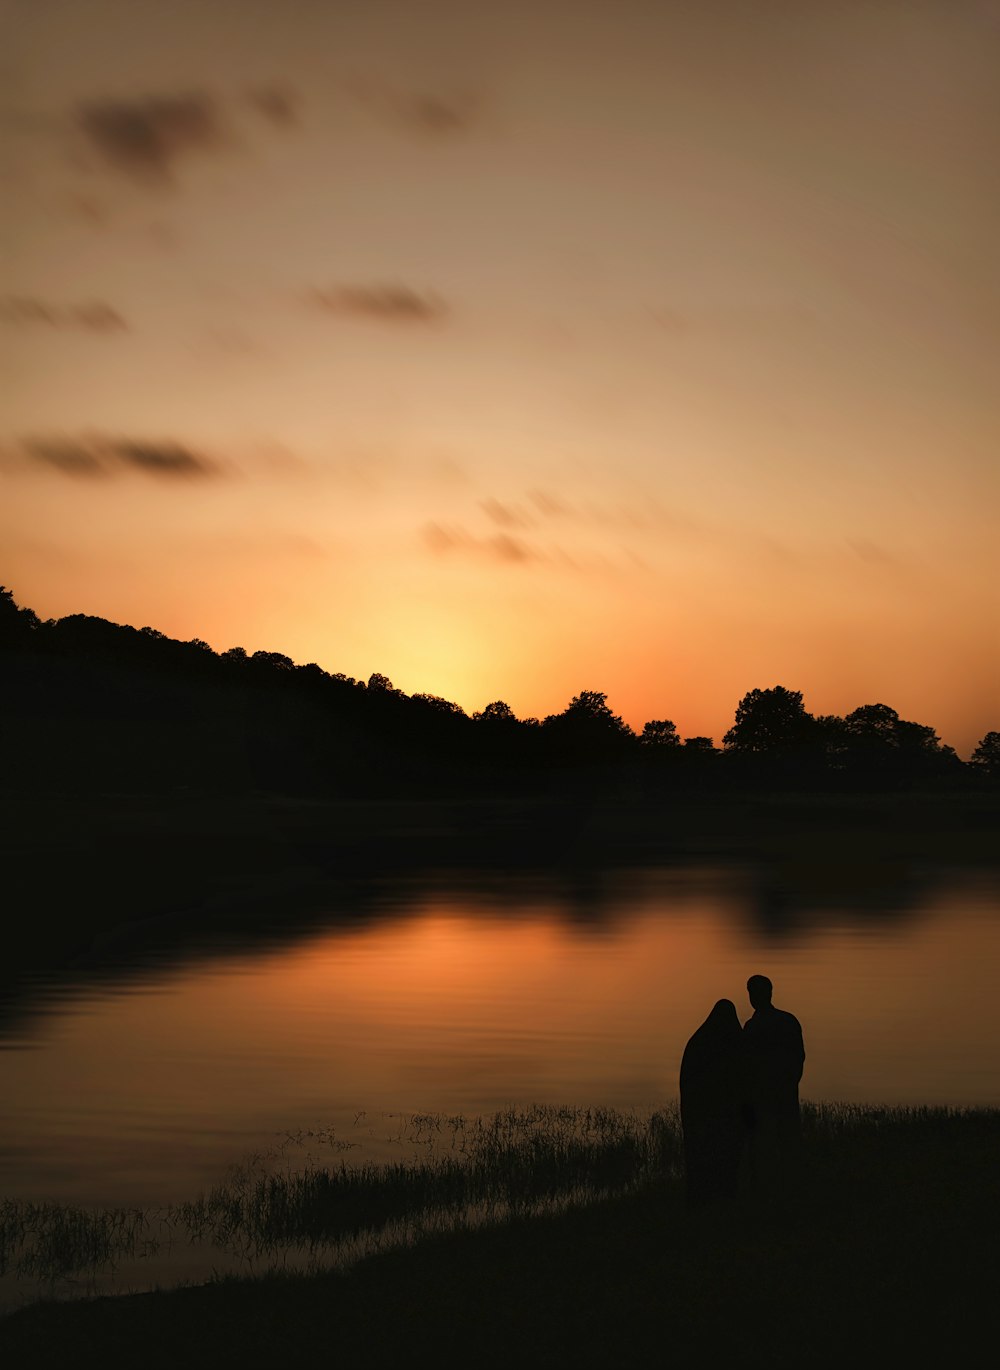 silhouette of man and woman standing near lake during sunset